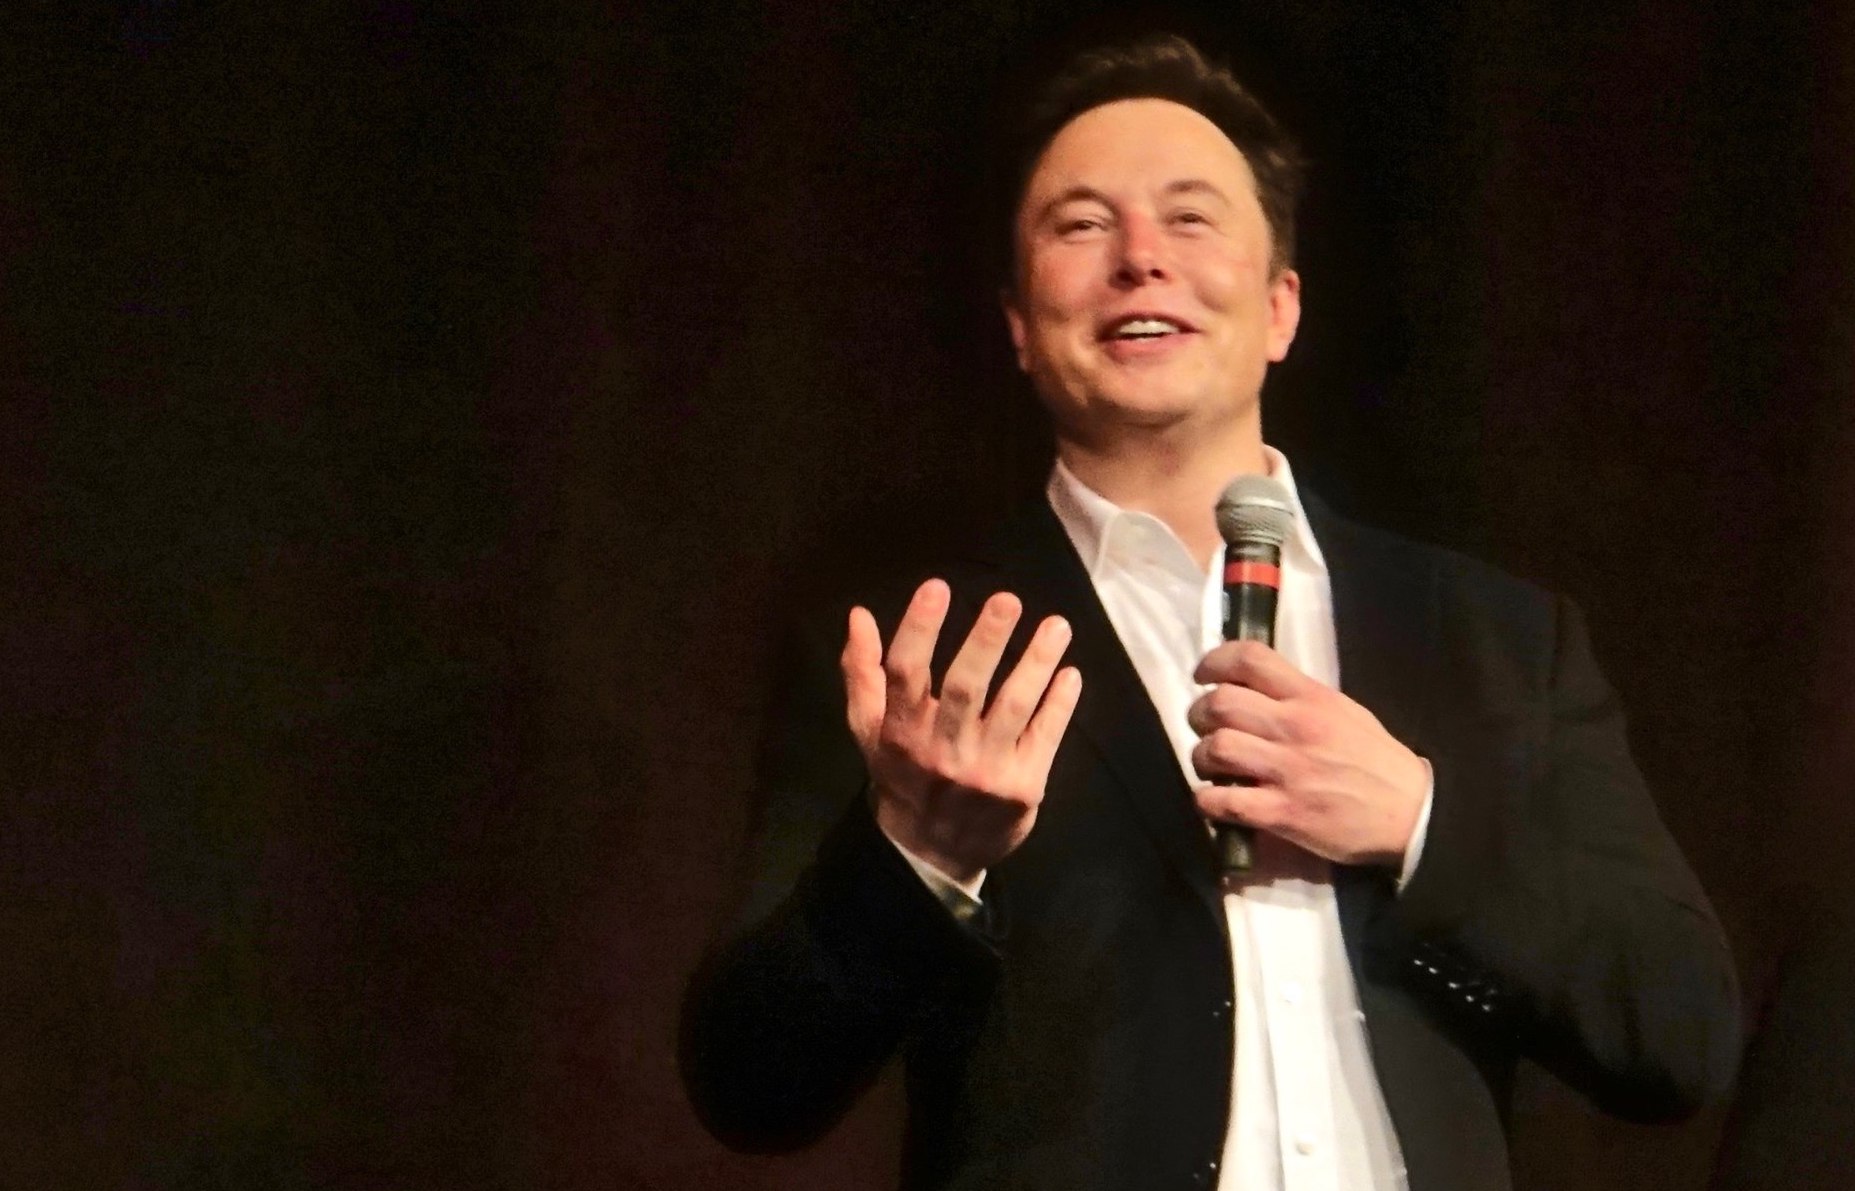 Elon Musk’s commitment to Tesla third-party audits was a victory